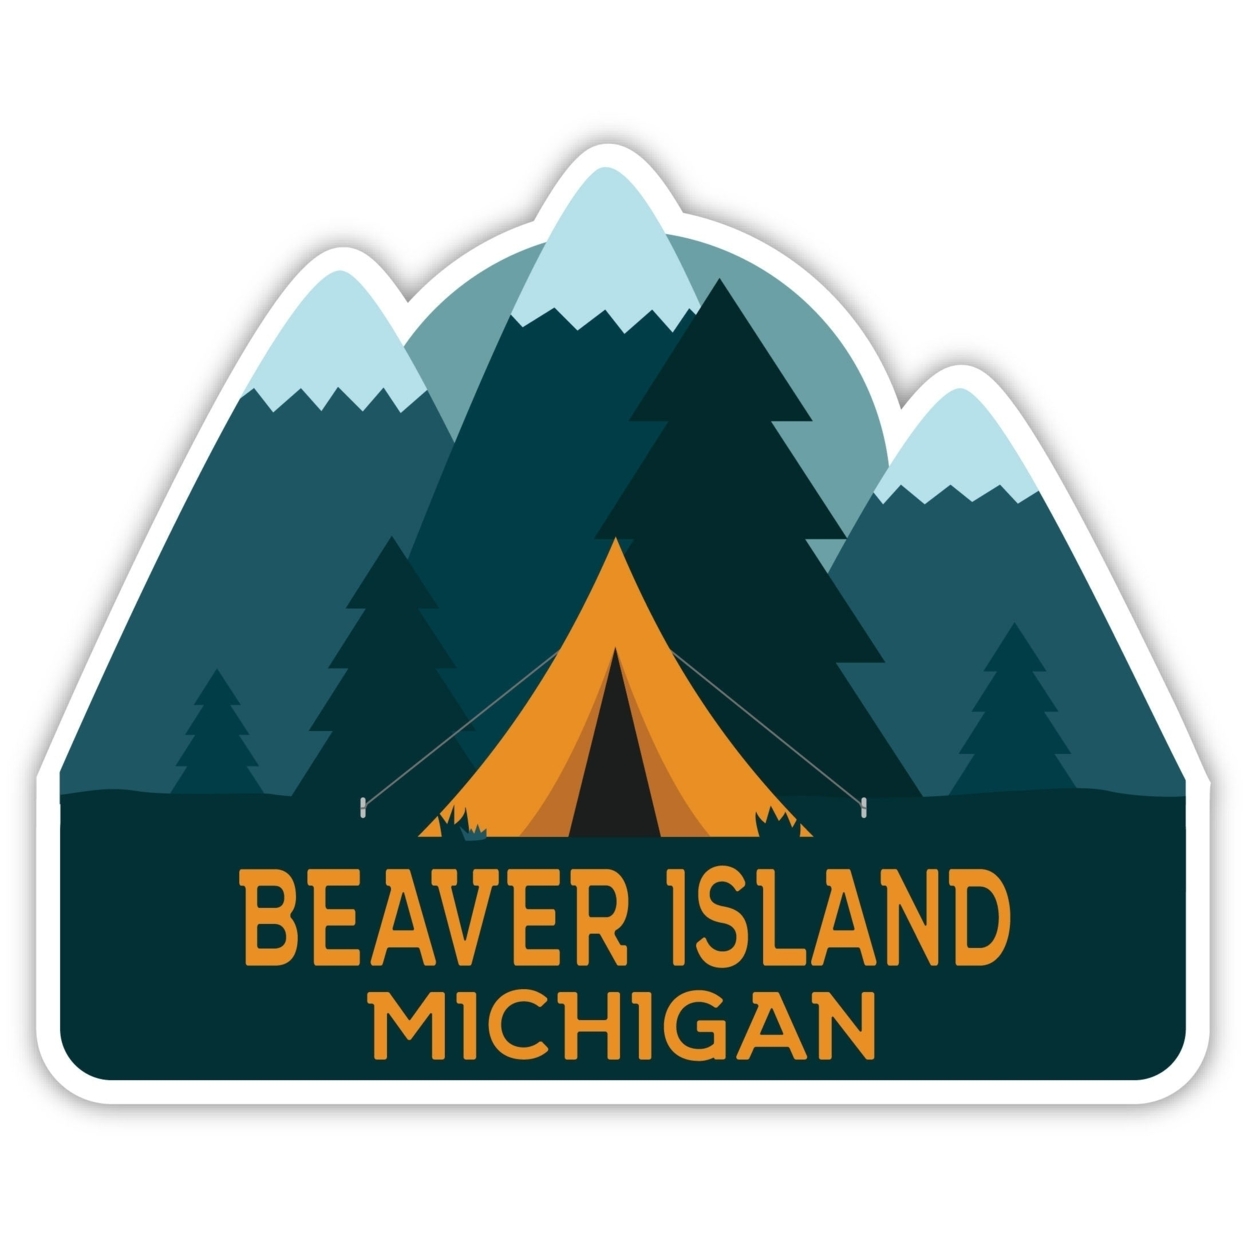 Beaver Island Michigan Souvenir Decorative Stickers (Choose Theme And Size) - Single Unit, 10-Inch, Great Outdoors